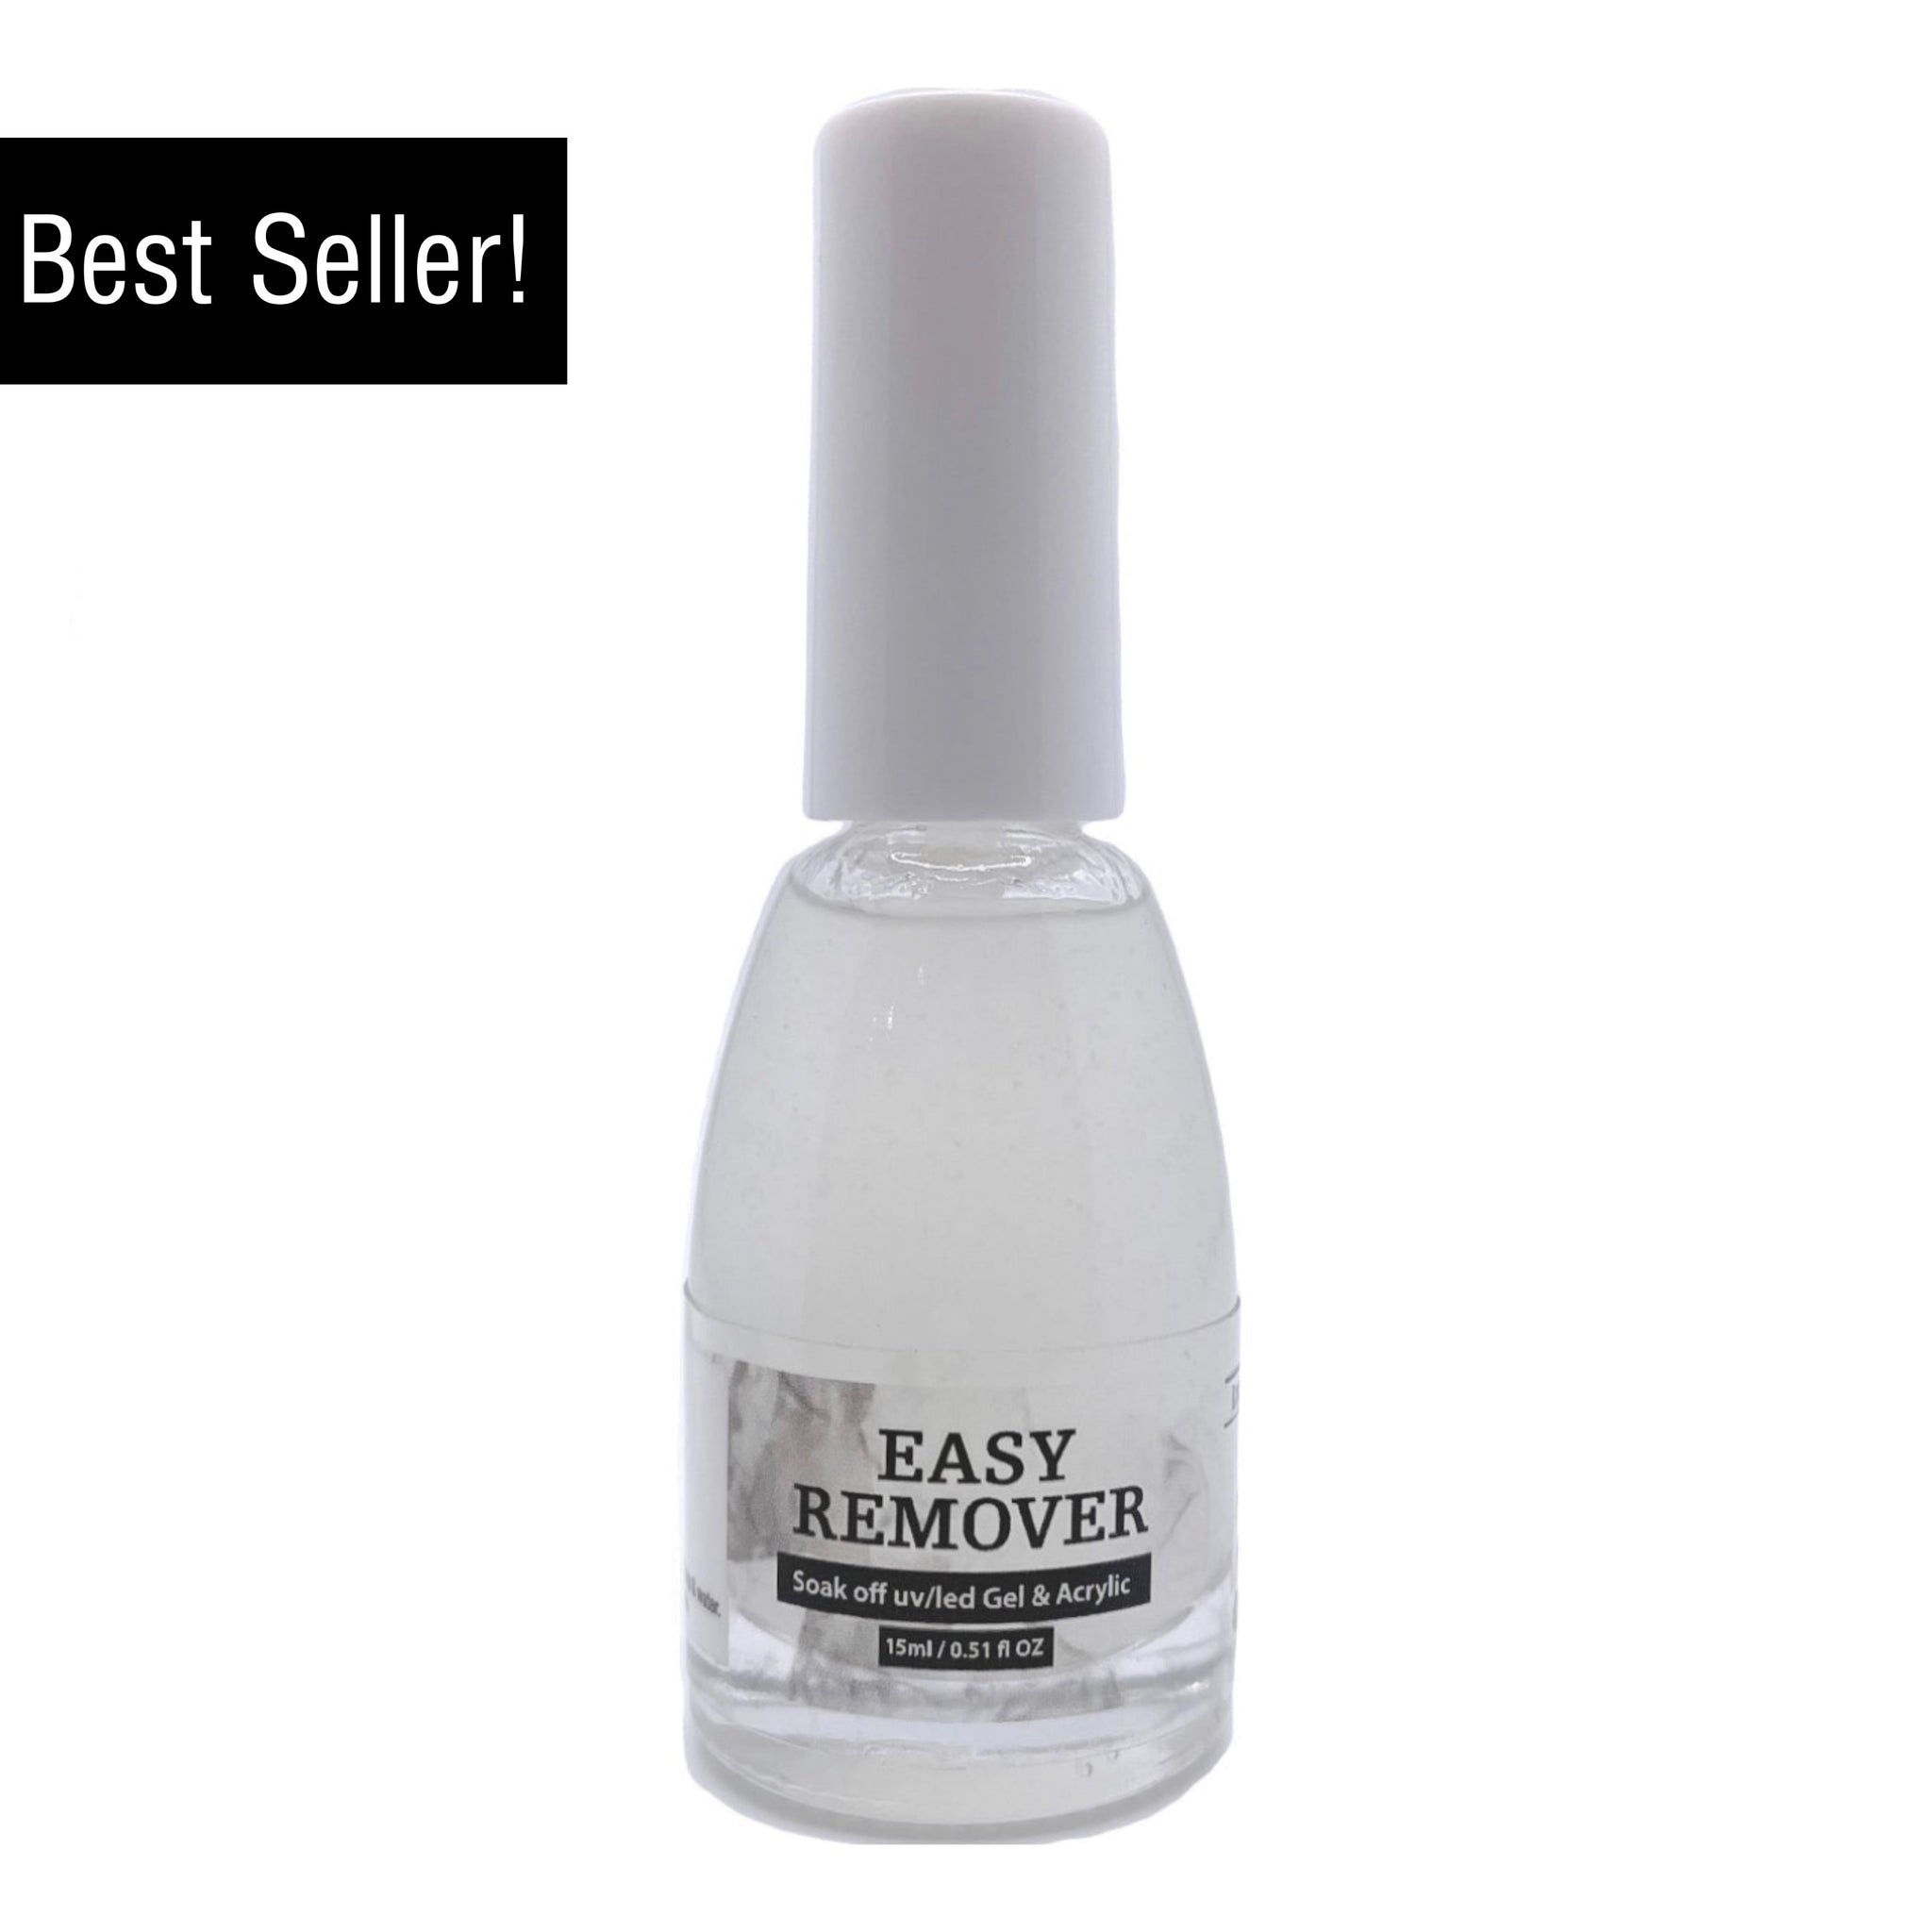 Gel Acrylic Nail Polish Remover – Easily & Quickly Removes Soak